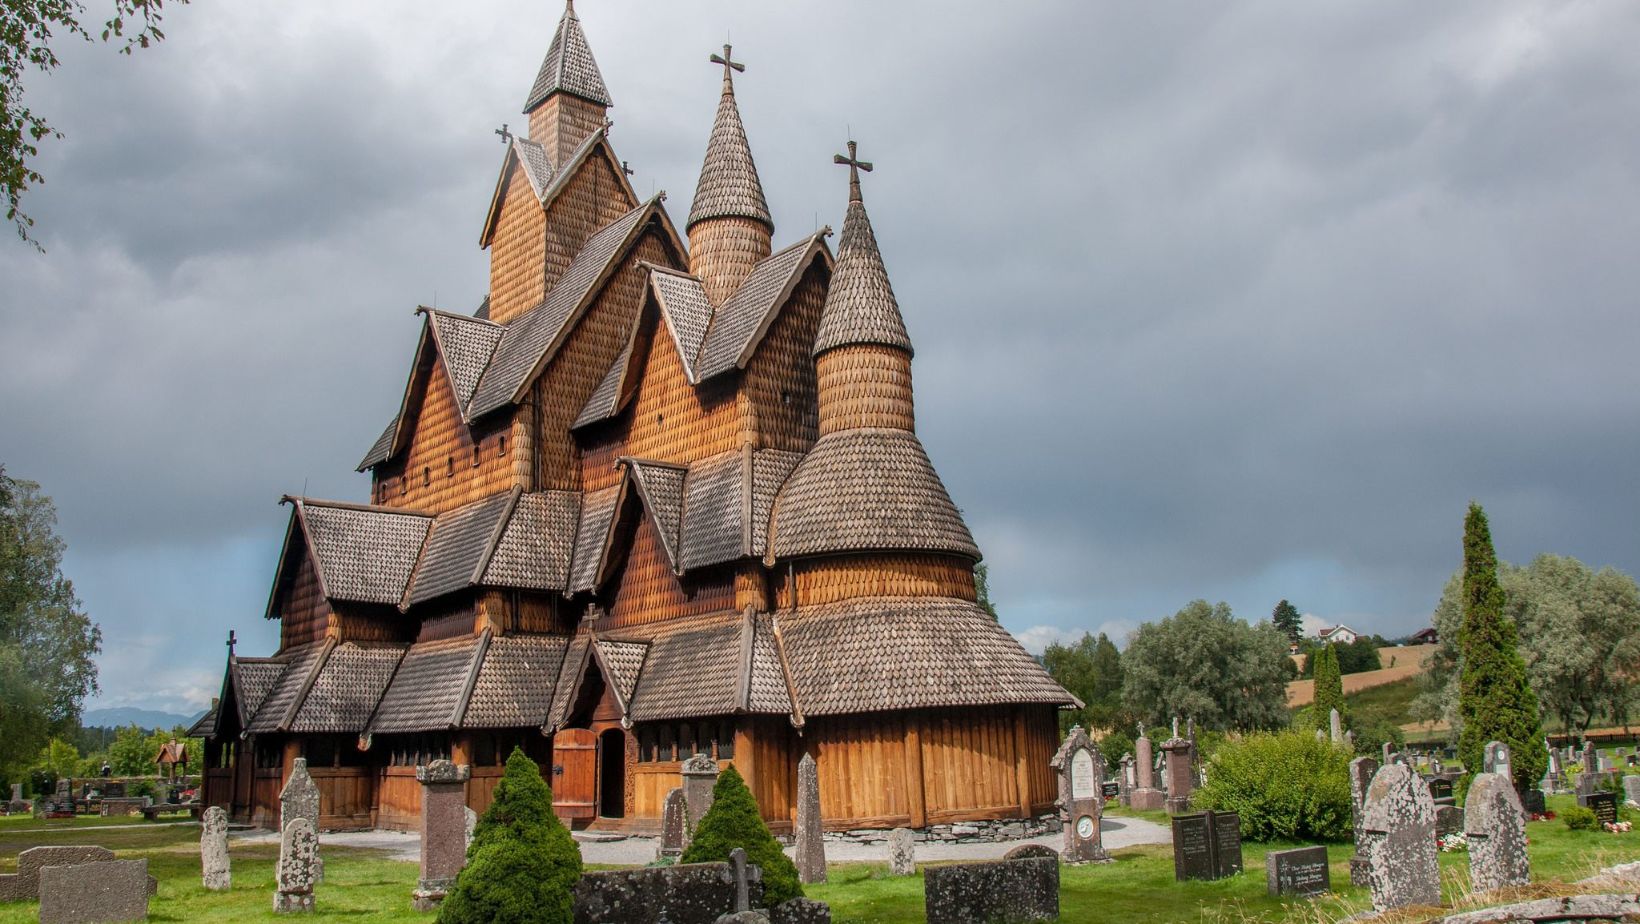 Stave churches, Why did Vikings Carve Intricate Woodwork?